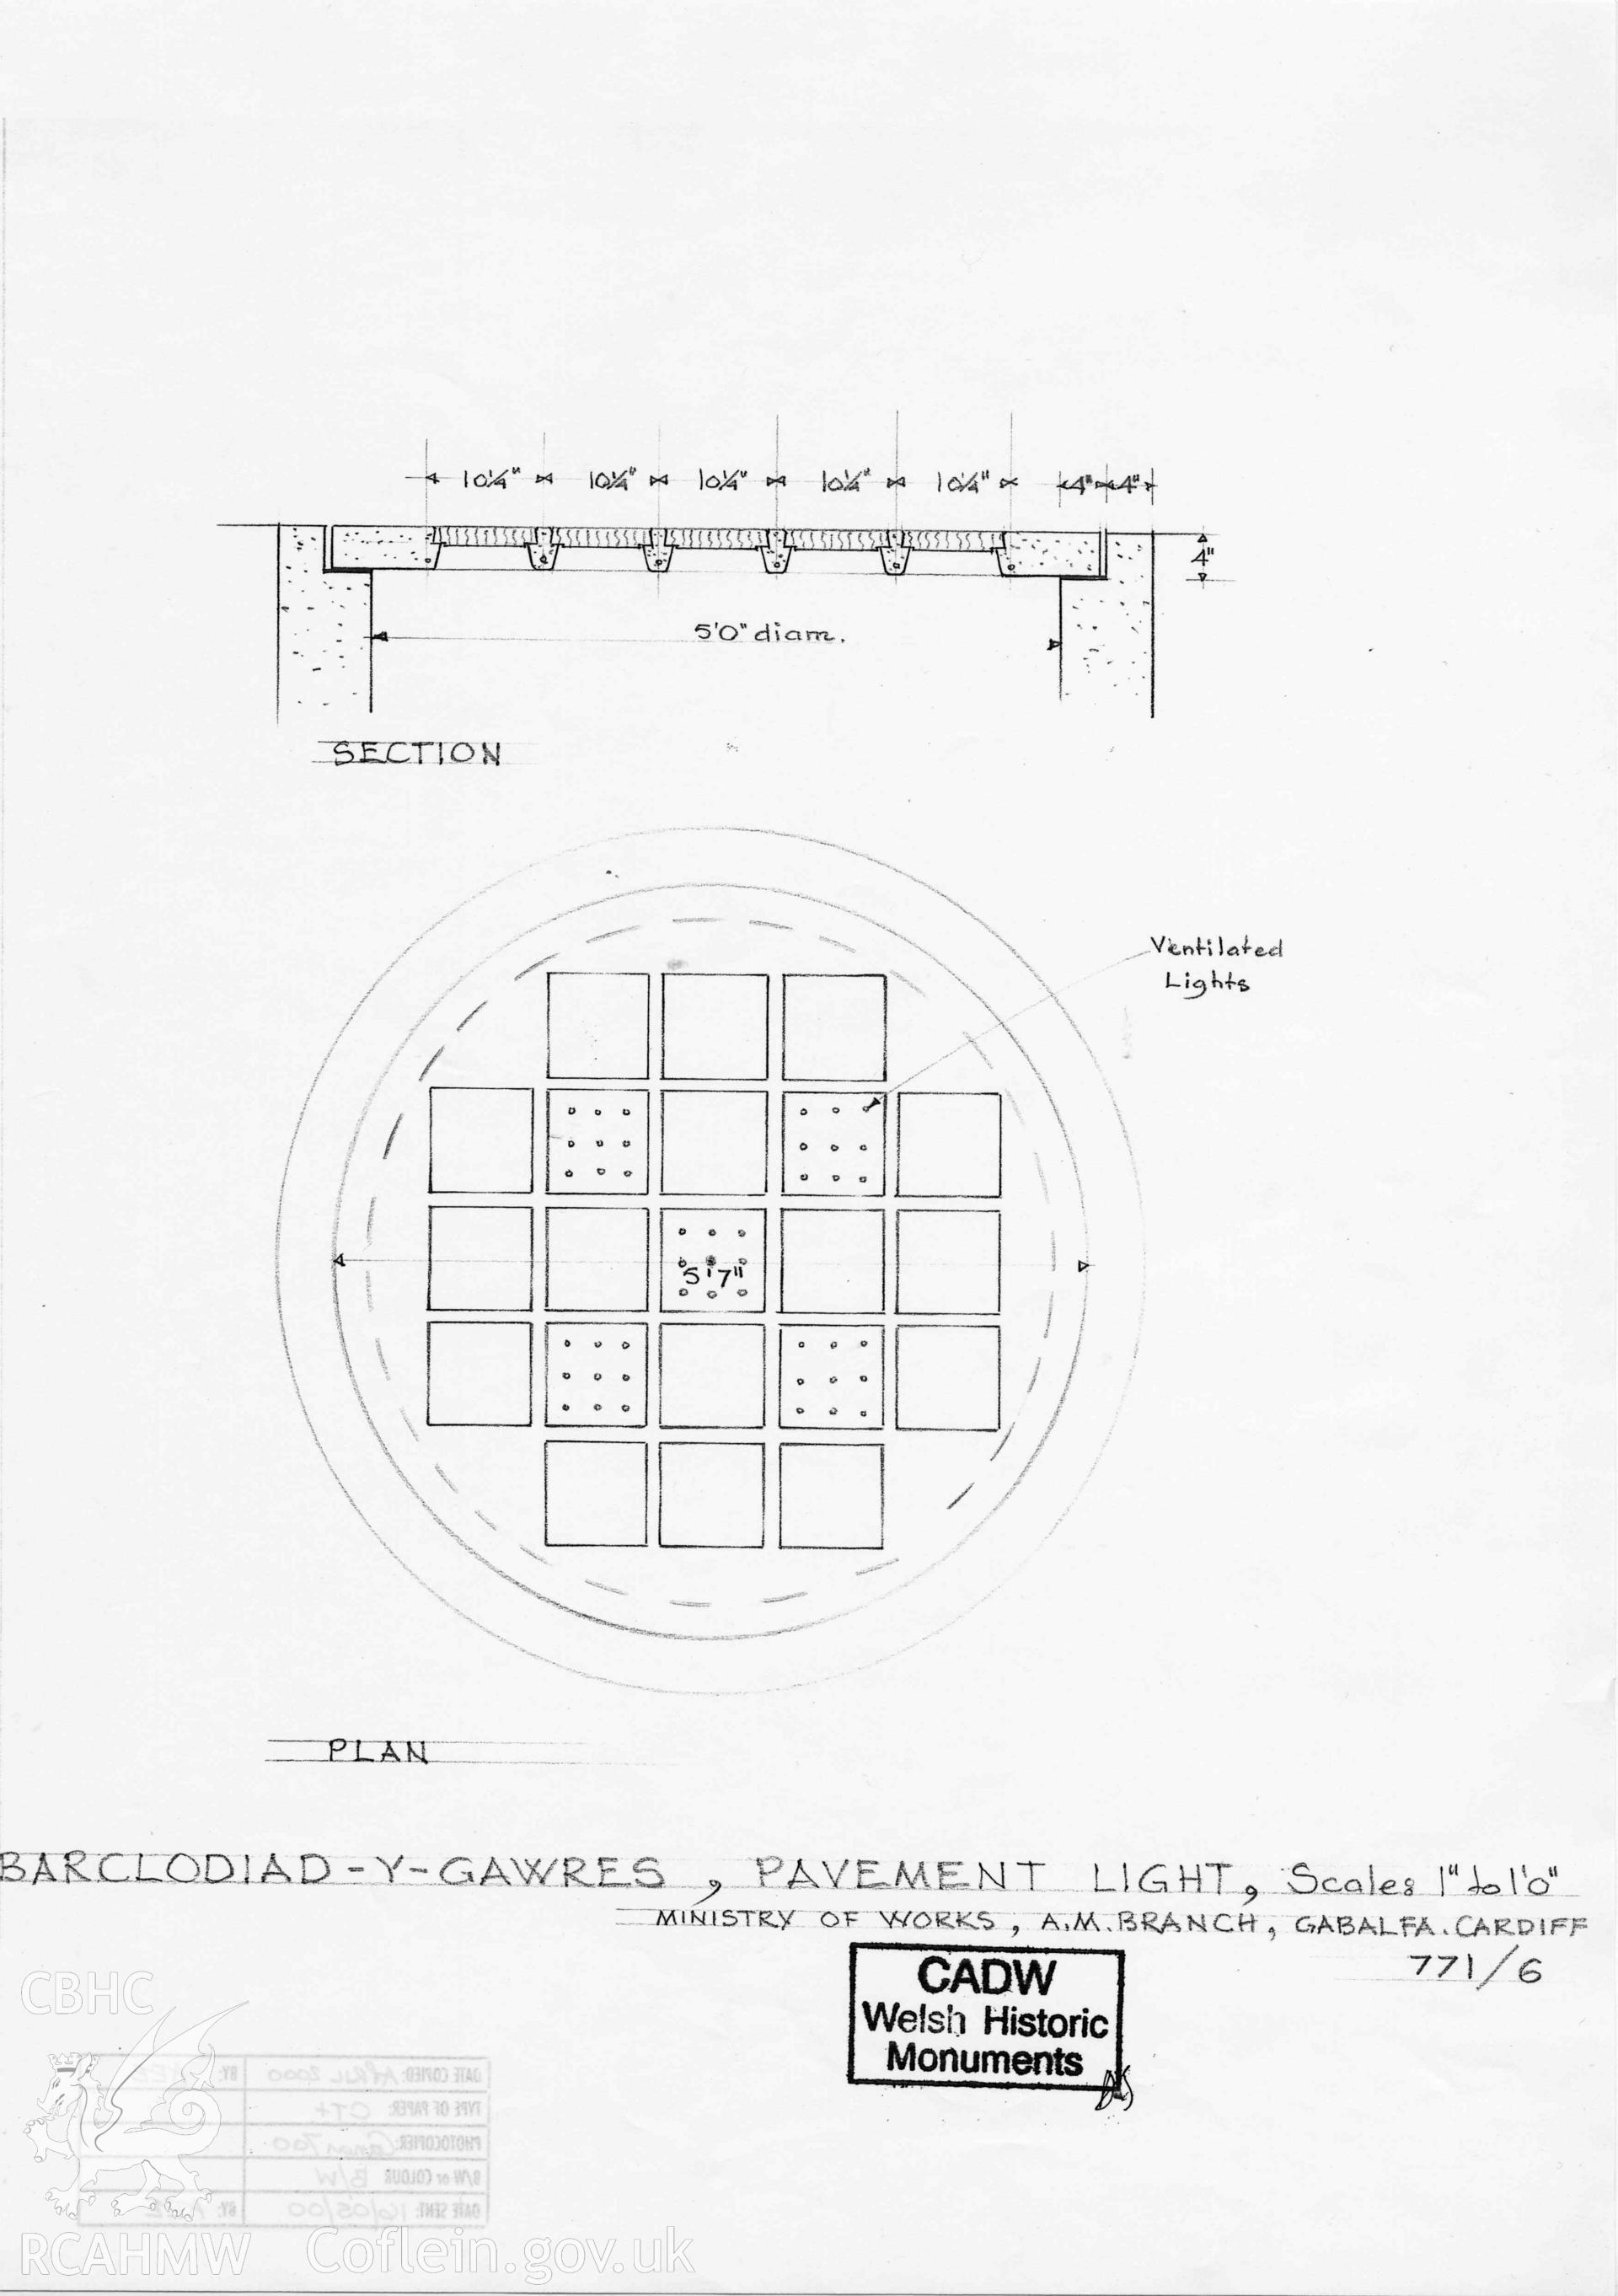 Cadw guardianship monument drawing of Barclodiad y Gawres Round Barrow. Pavement light, plan + section. Cadw Ref No: 771/6. Scale 1:12.